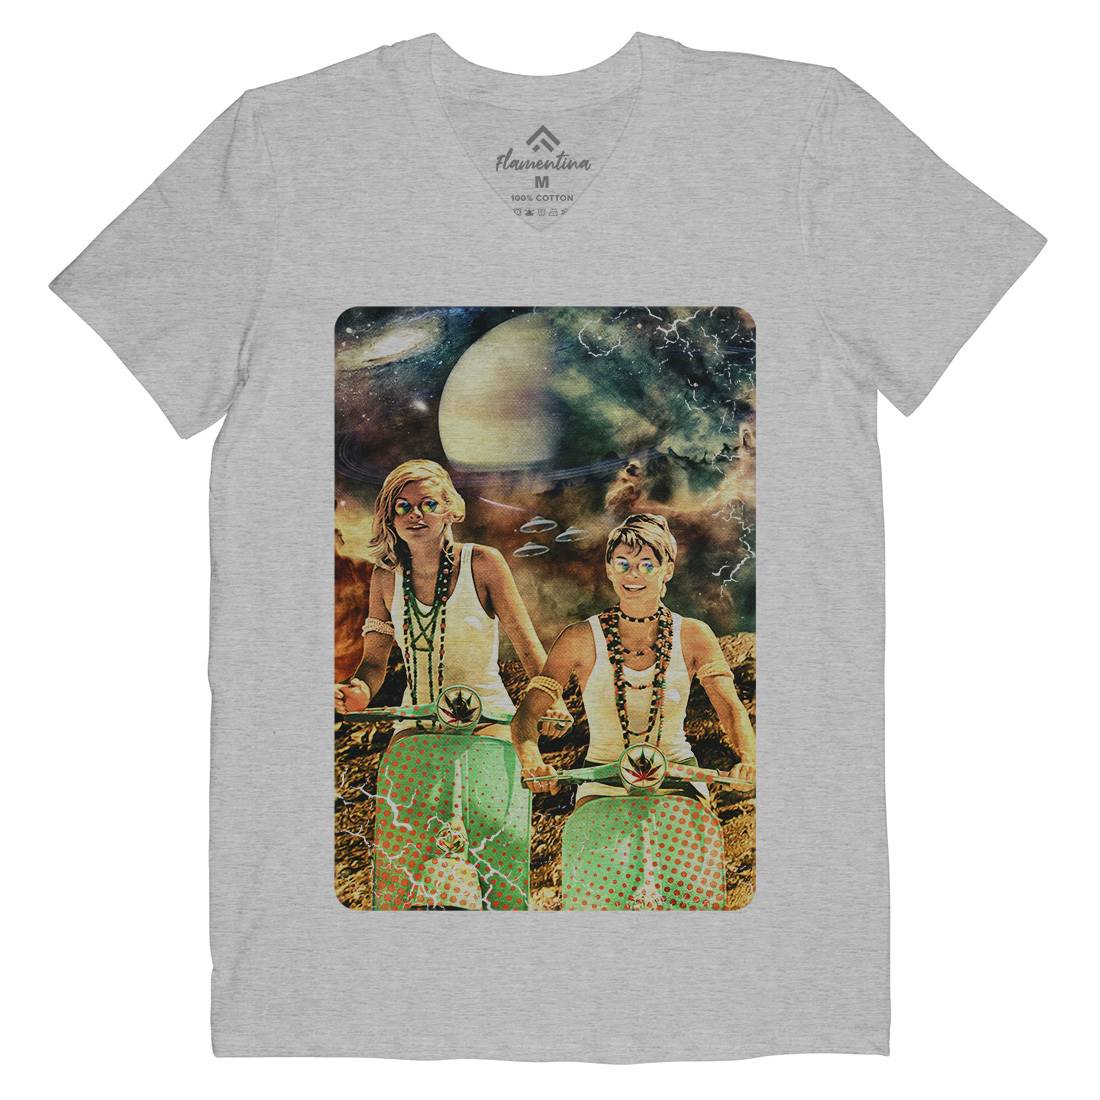 Galactic Cruise Mens V-Neck T-Shirt Space A839